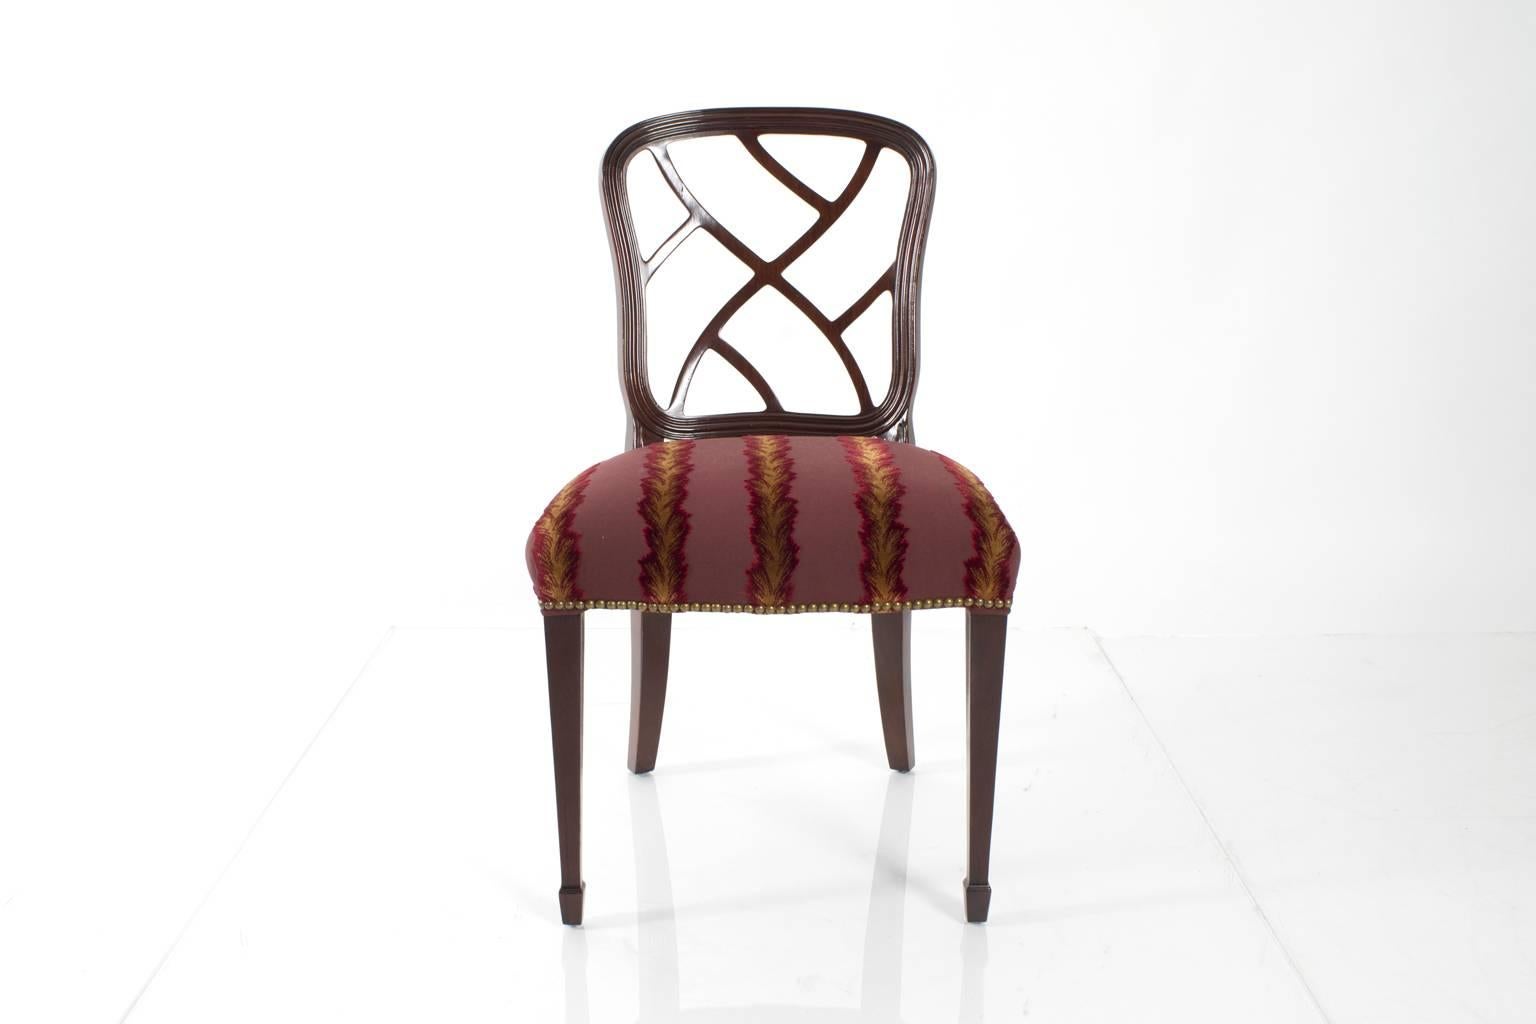 Set of eight mahogany, English style dining chairs upholstered in cut velvet fabric. 

Armchair dimensions: W: 22